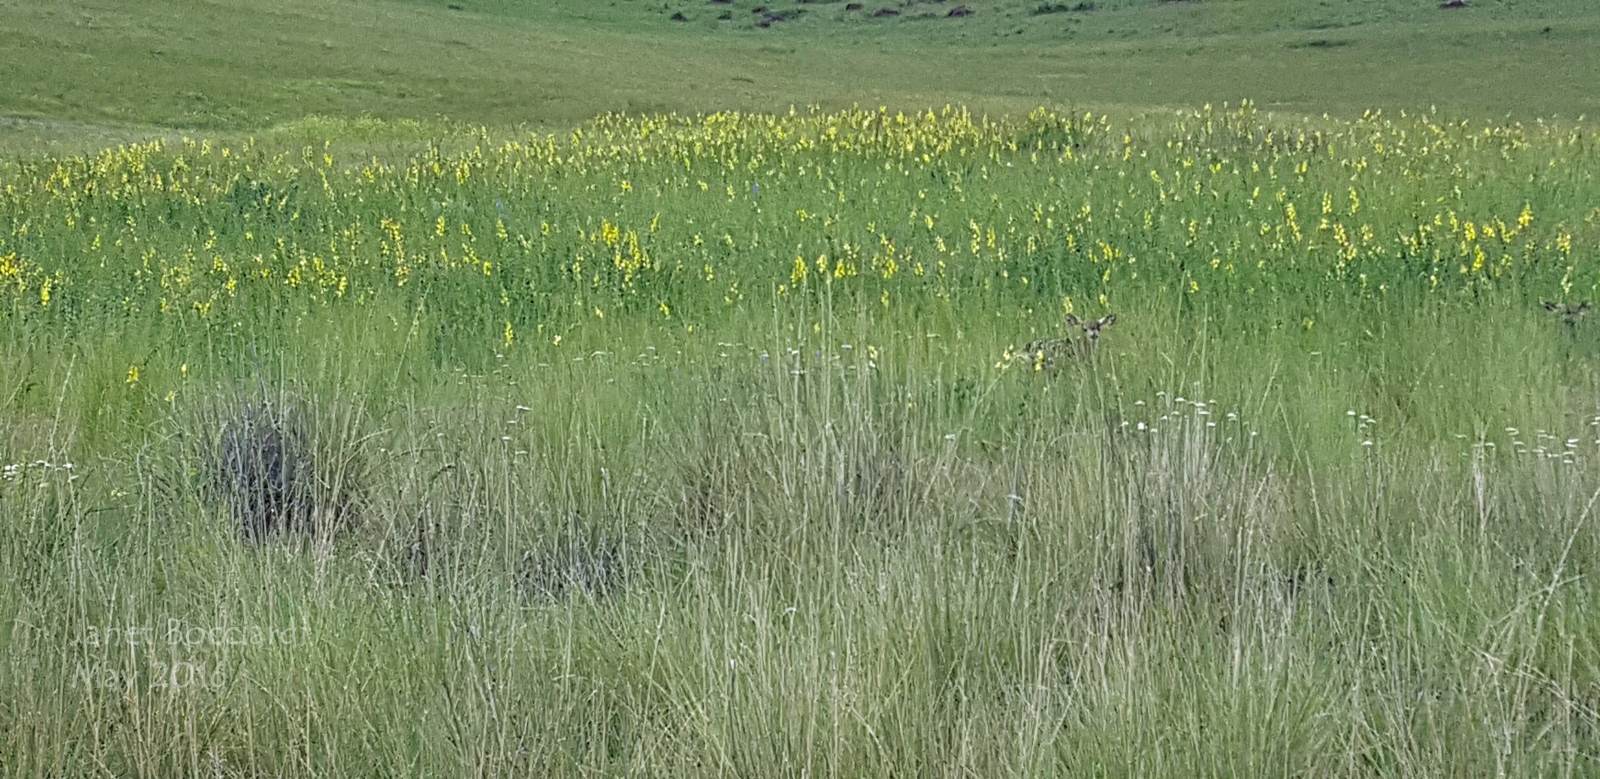 Fawns in meadow, National Bison Range